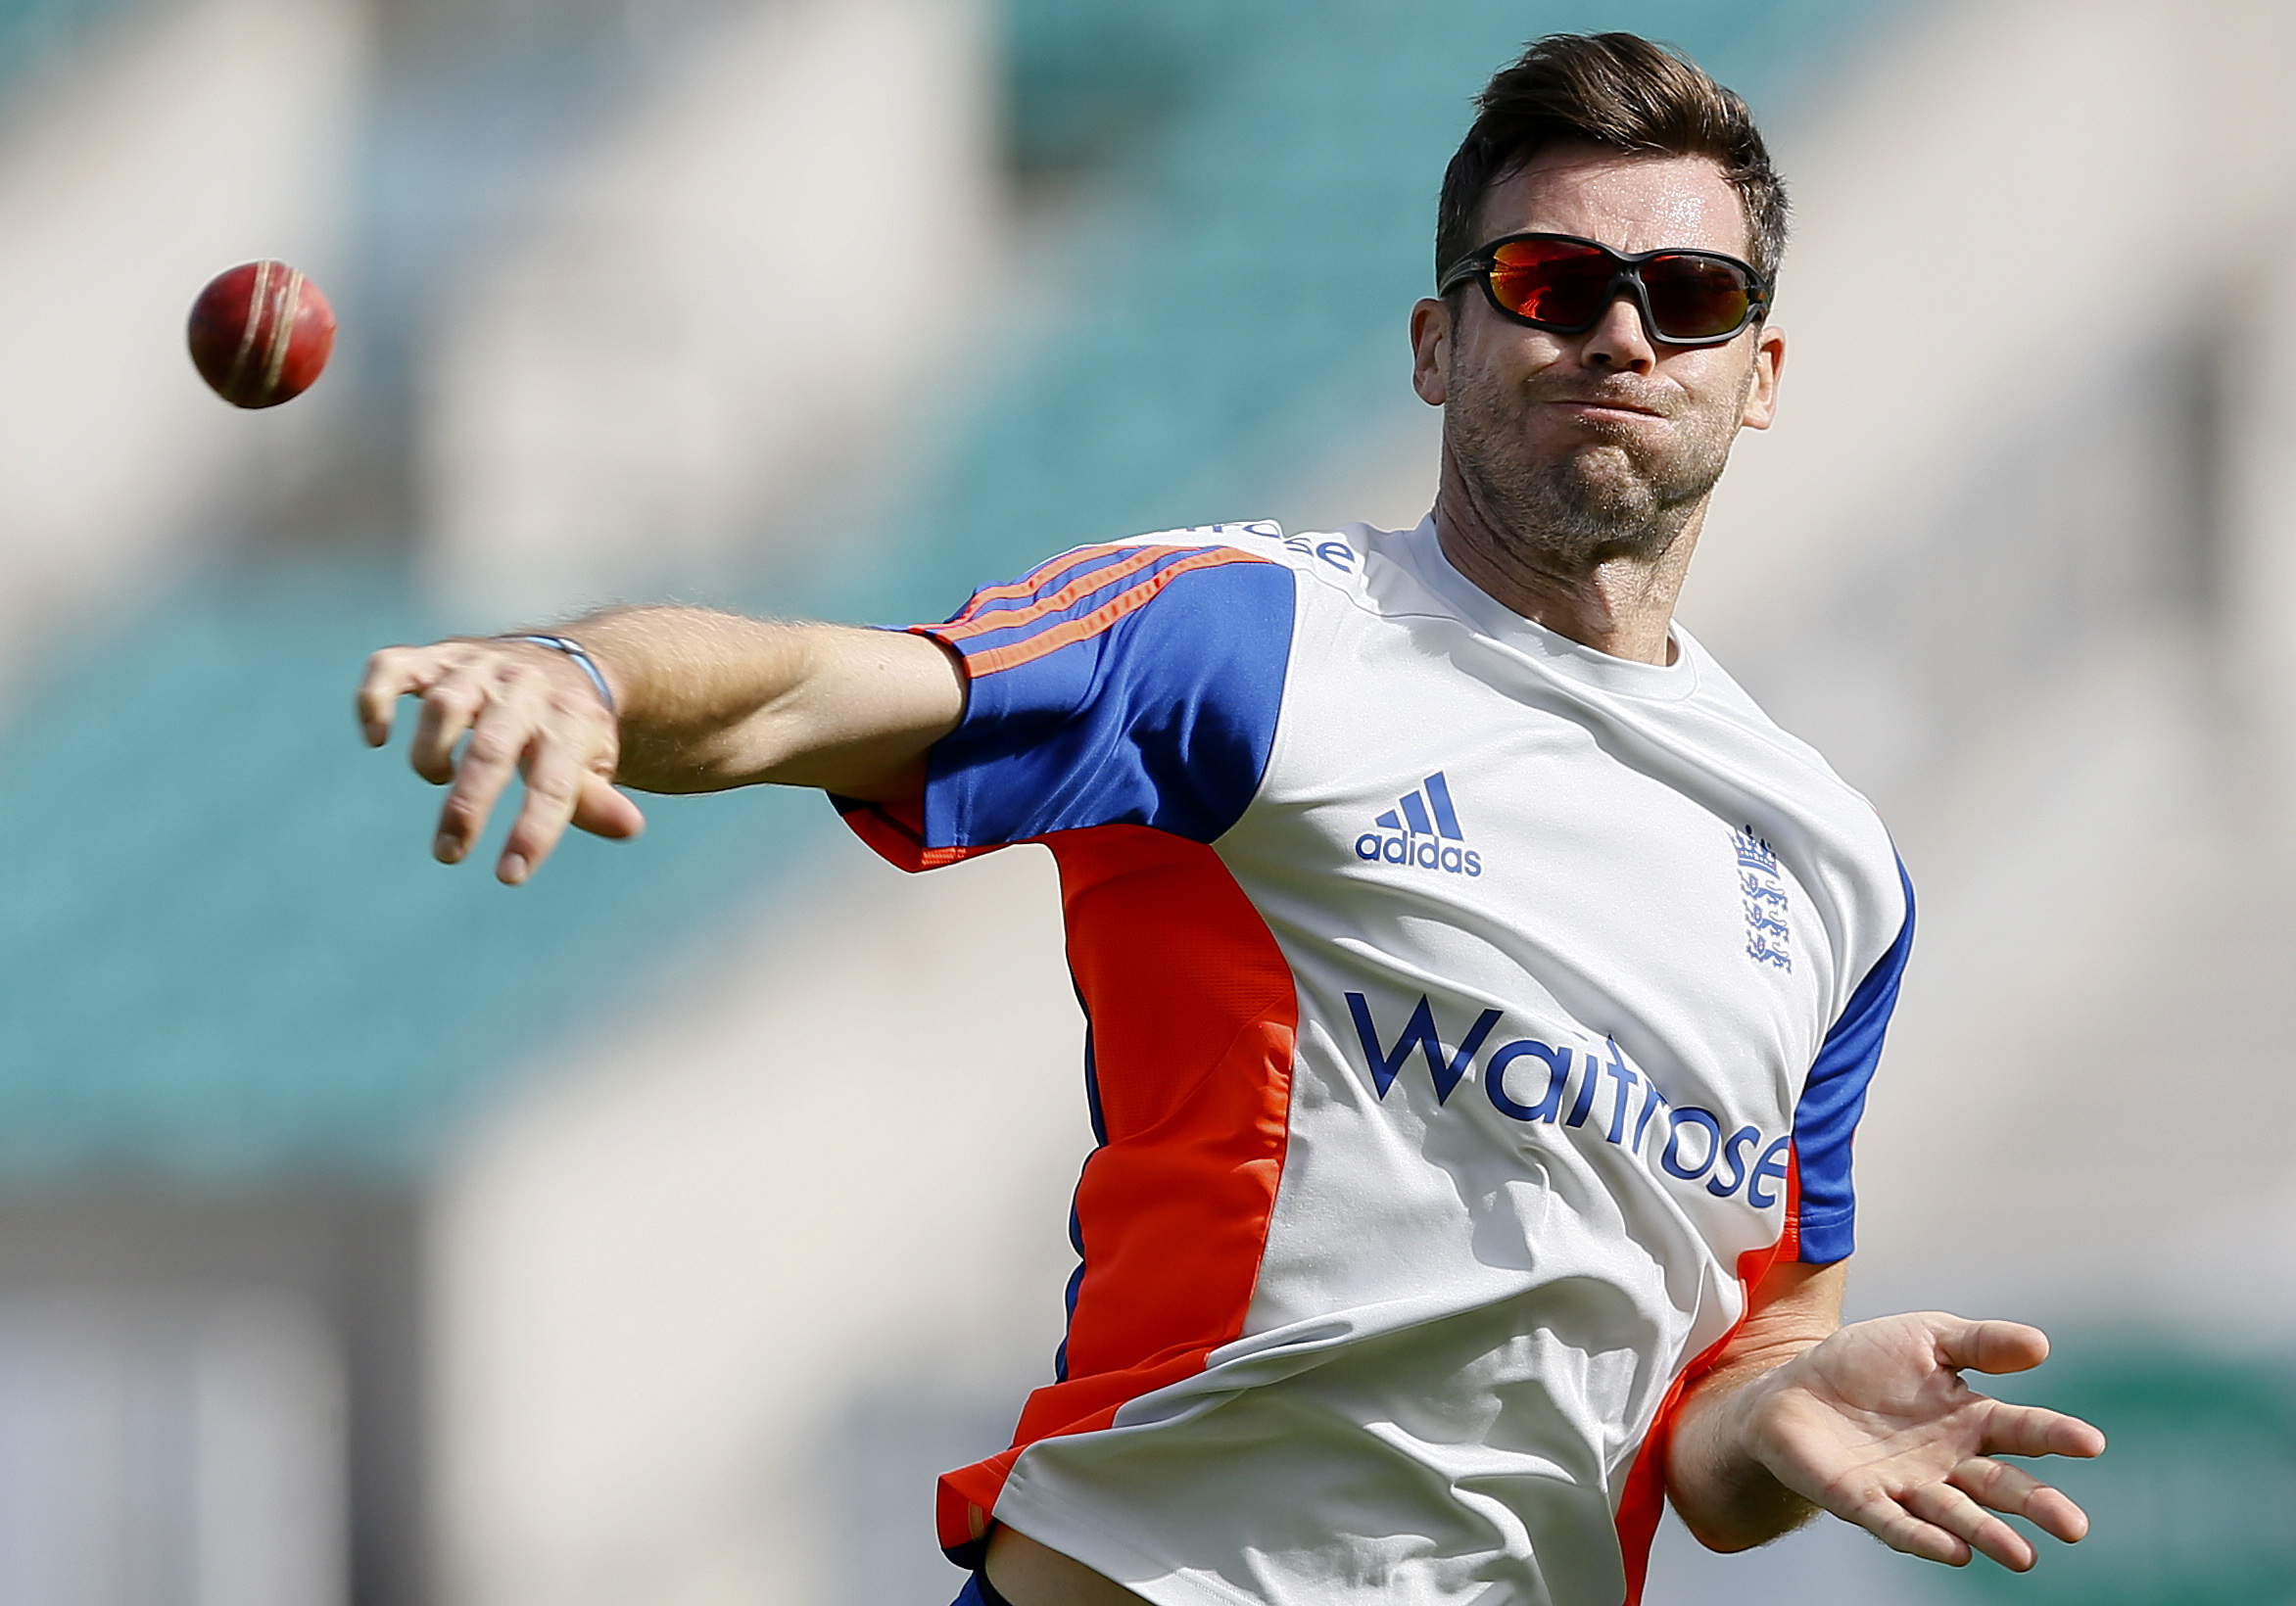 England's James Anderson was able to take part in a training session at the Oval on Wednesday, but has not fully recovered from a side strain. Photo: AP